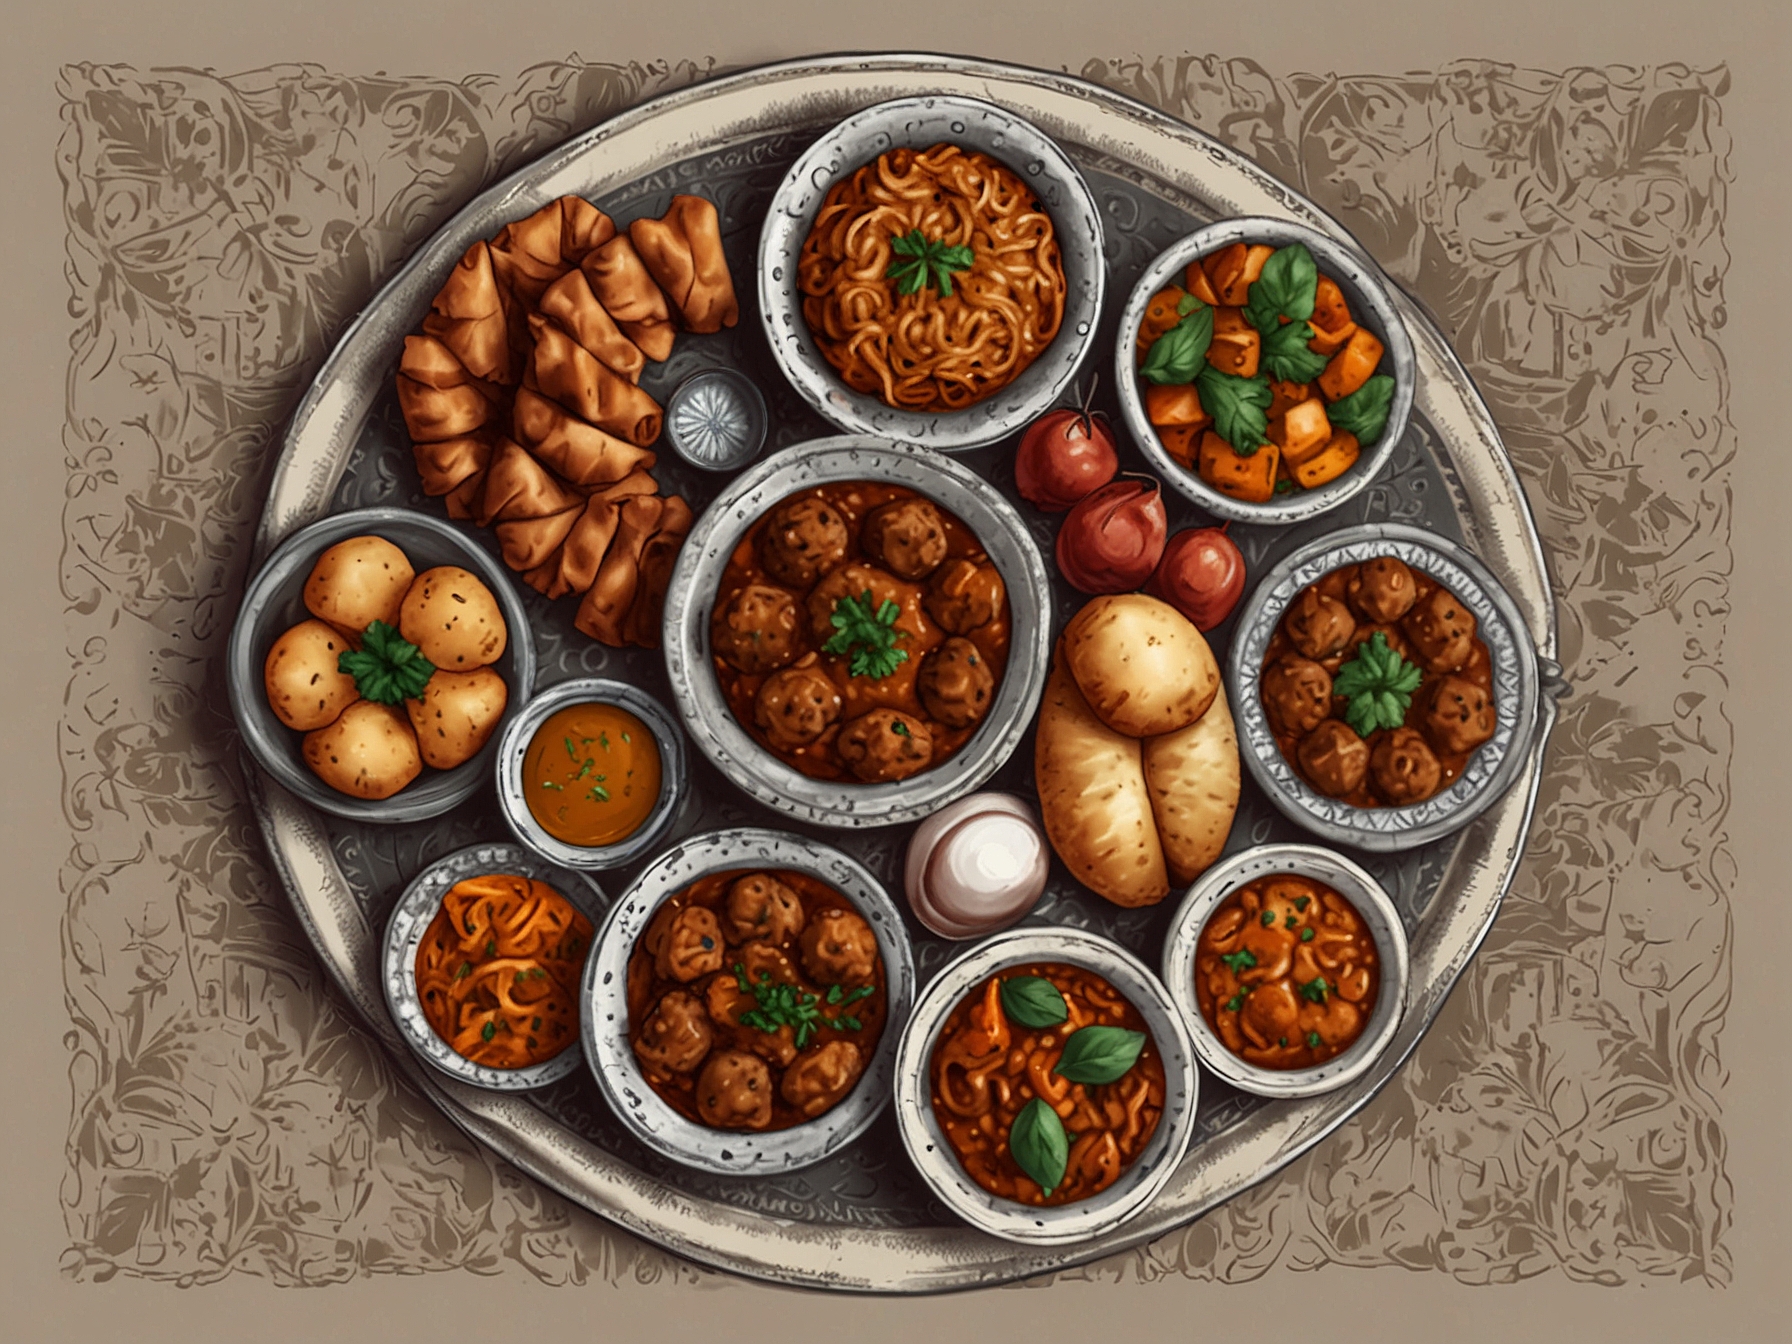 A traditional Eid ul Adha feast with an array of savory dishes, symbolizing the spirit of sharing and community.